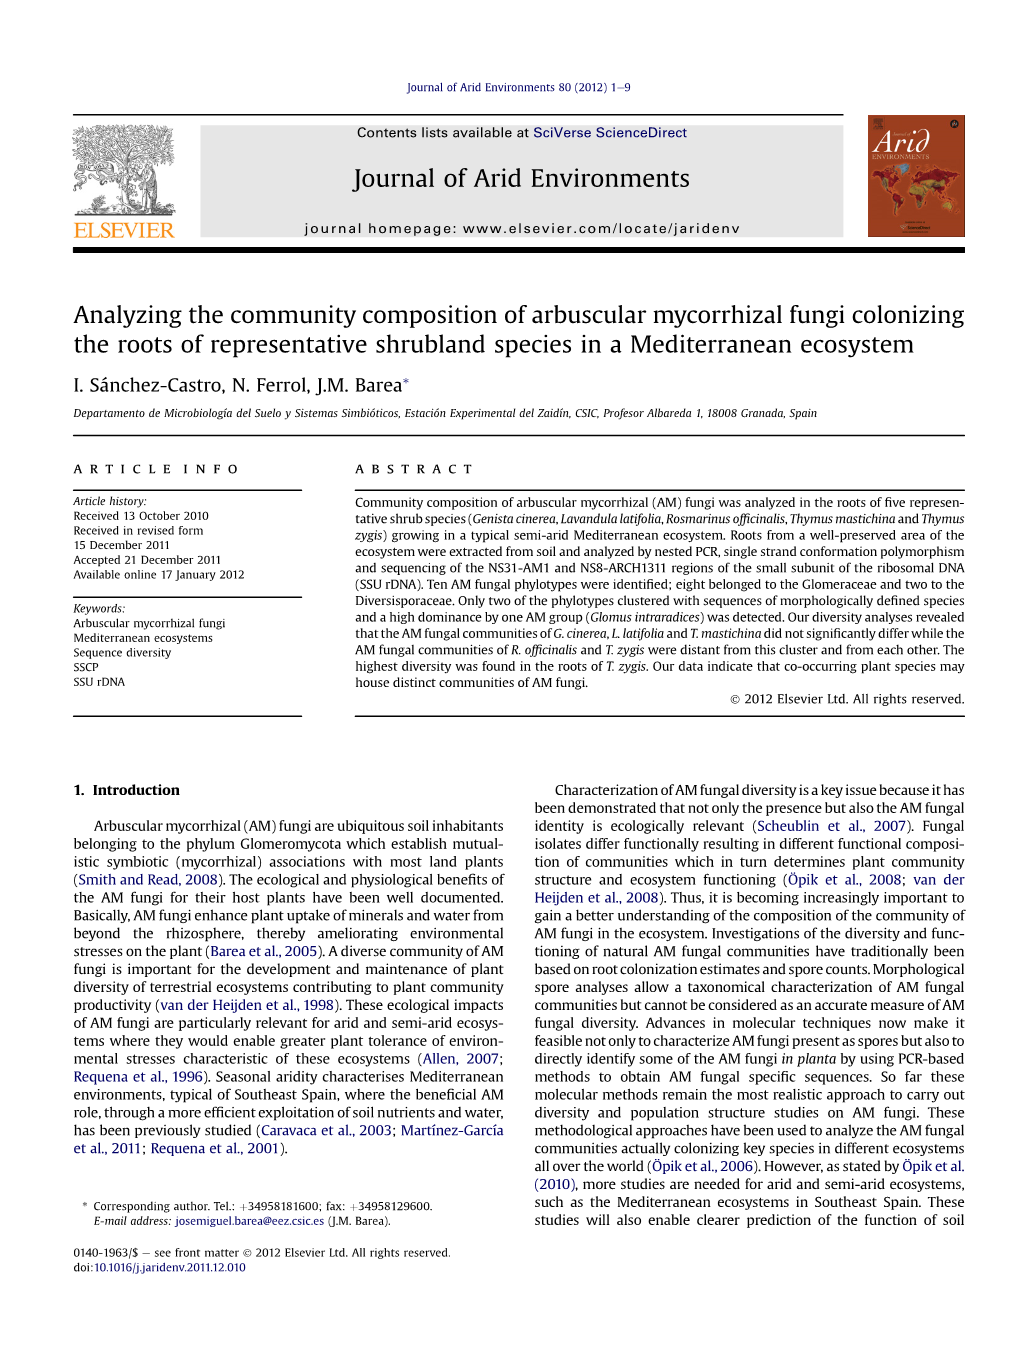 Analyzing the Community Composition of Arbuscular Mycorrhizal Fungi Colonizing the Roots of Representative Shrubland Species in a Mediterranean Ecosystem